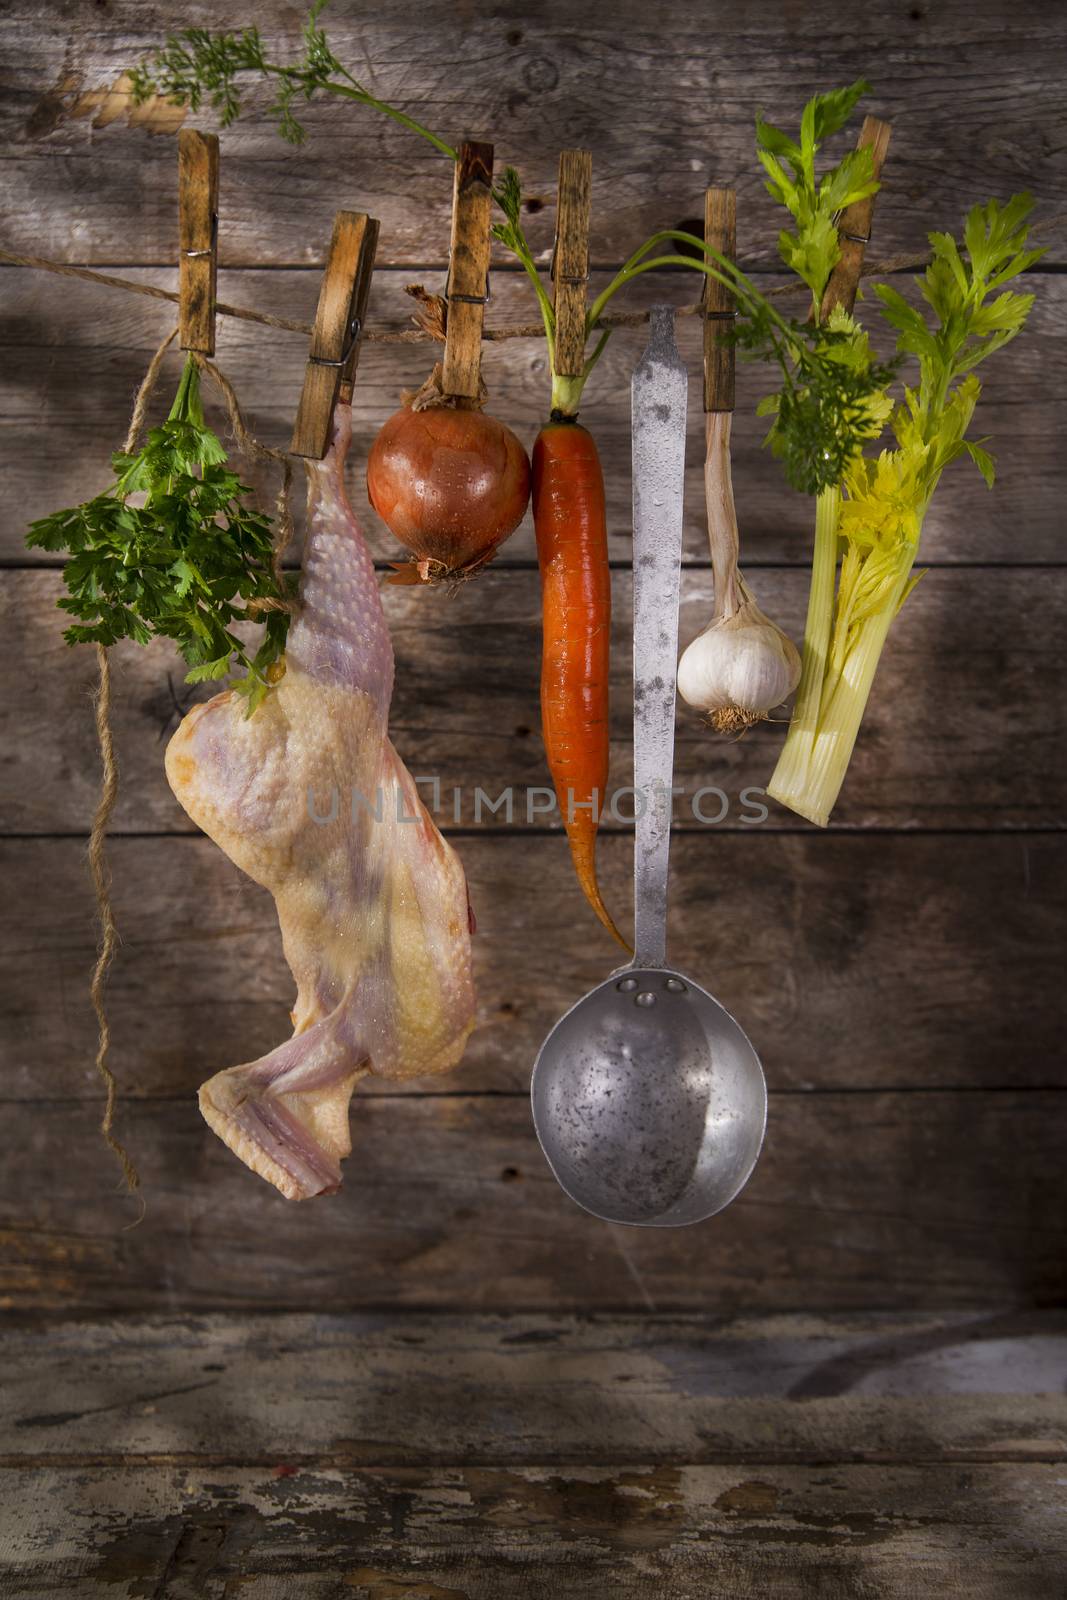 Ingredients necessary for the preparation of the chicken broth